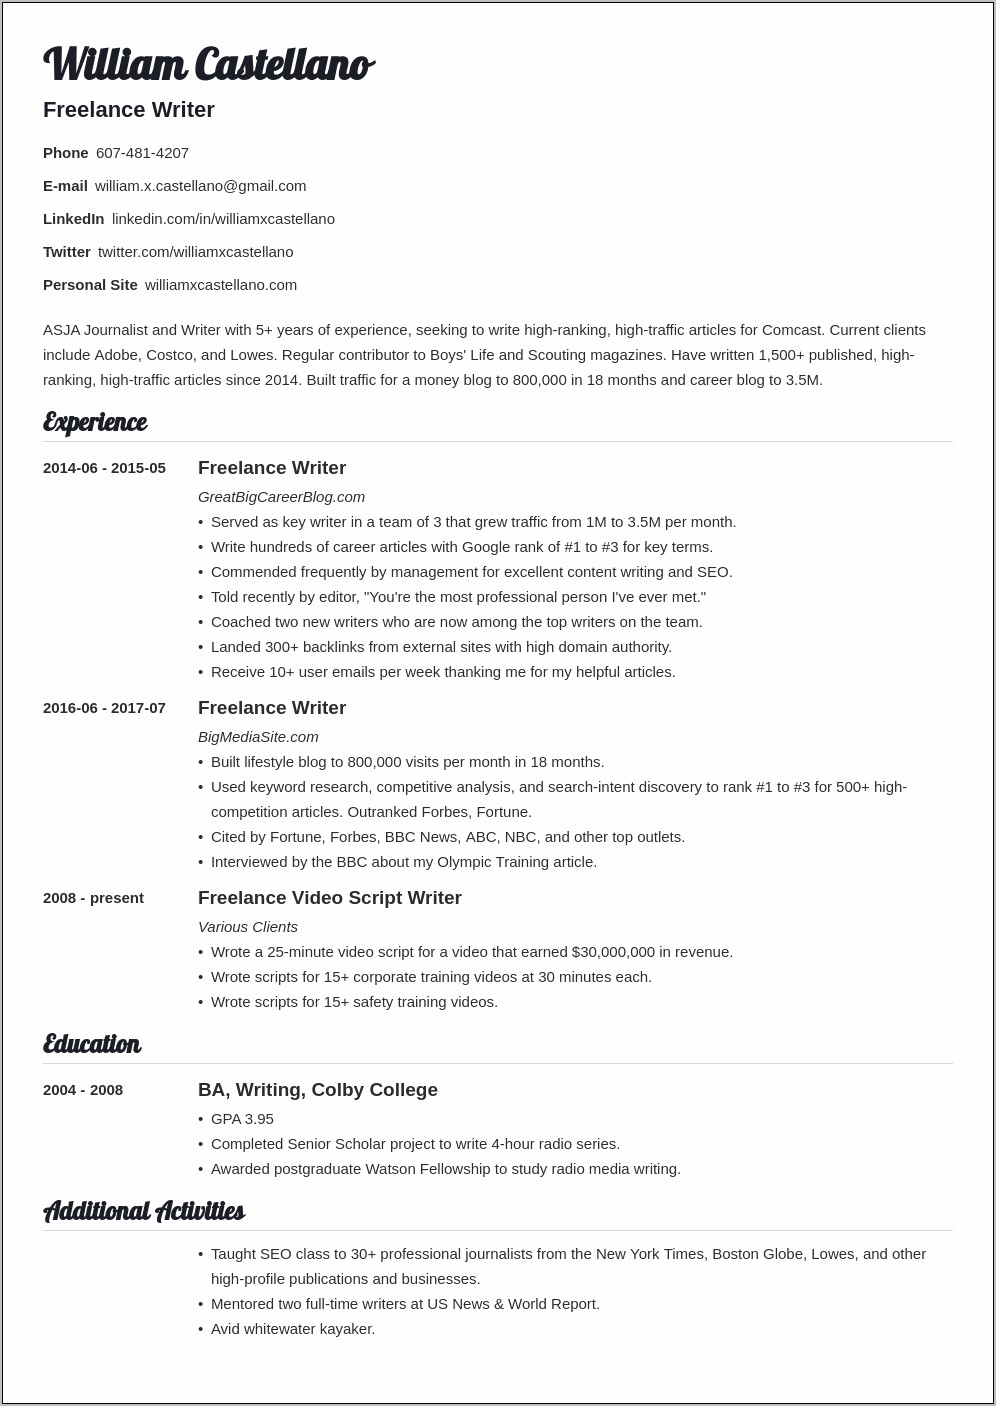 Lowe's Department Manager Resume